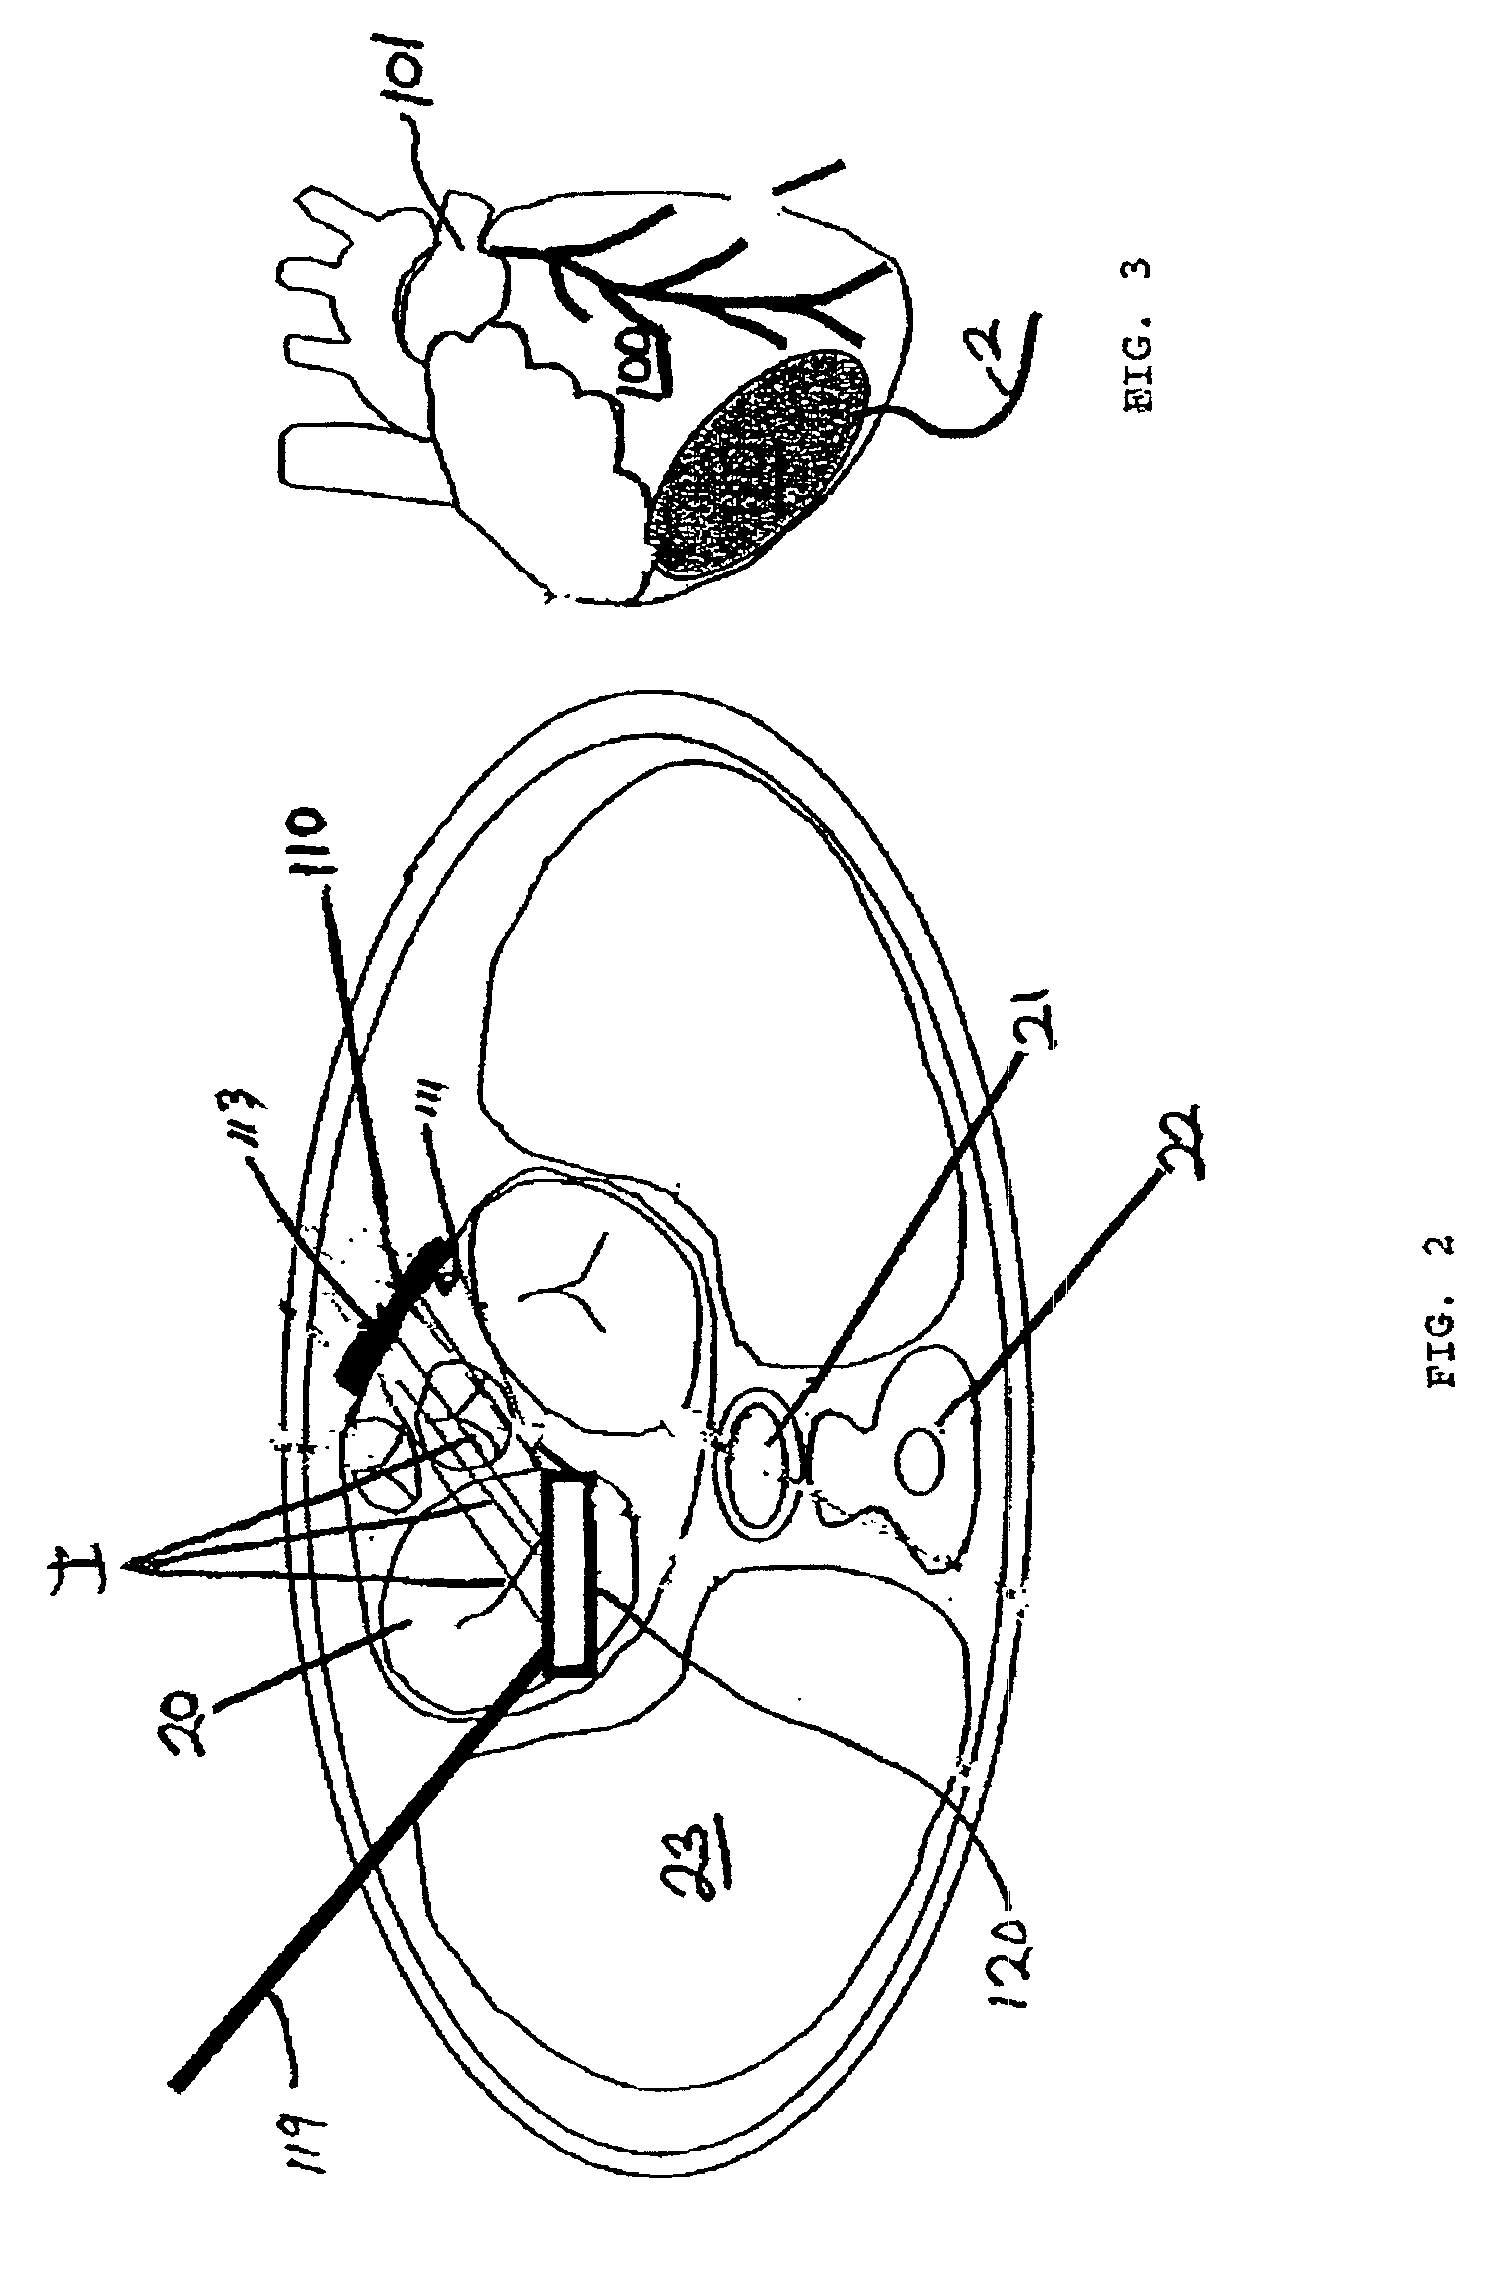 Expandable intracardiac return electrode and method of use